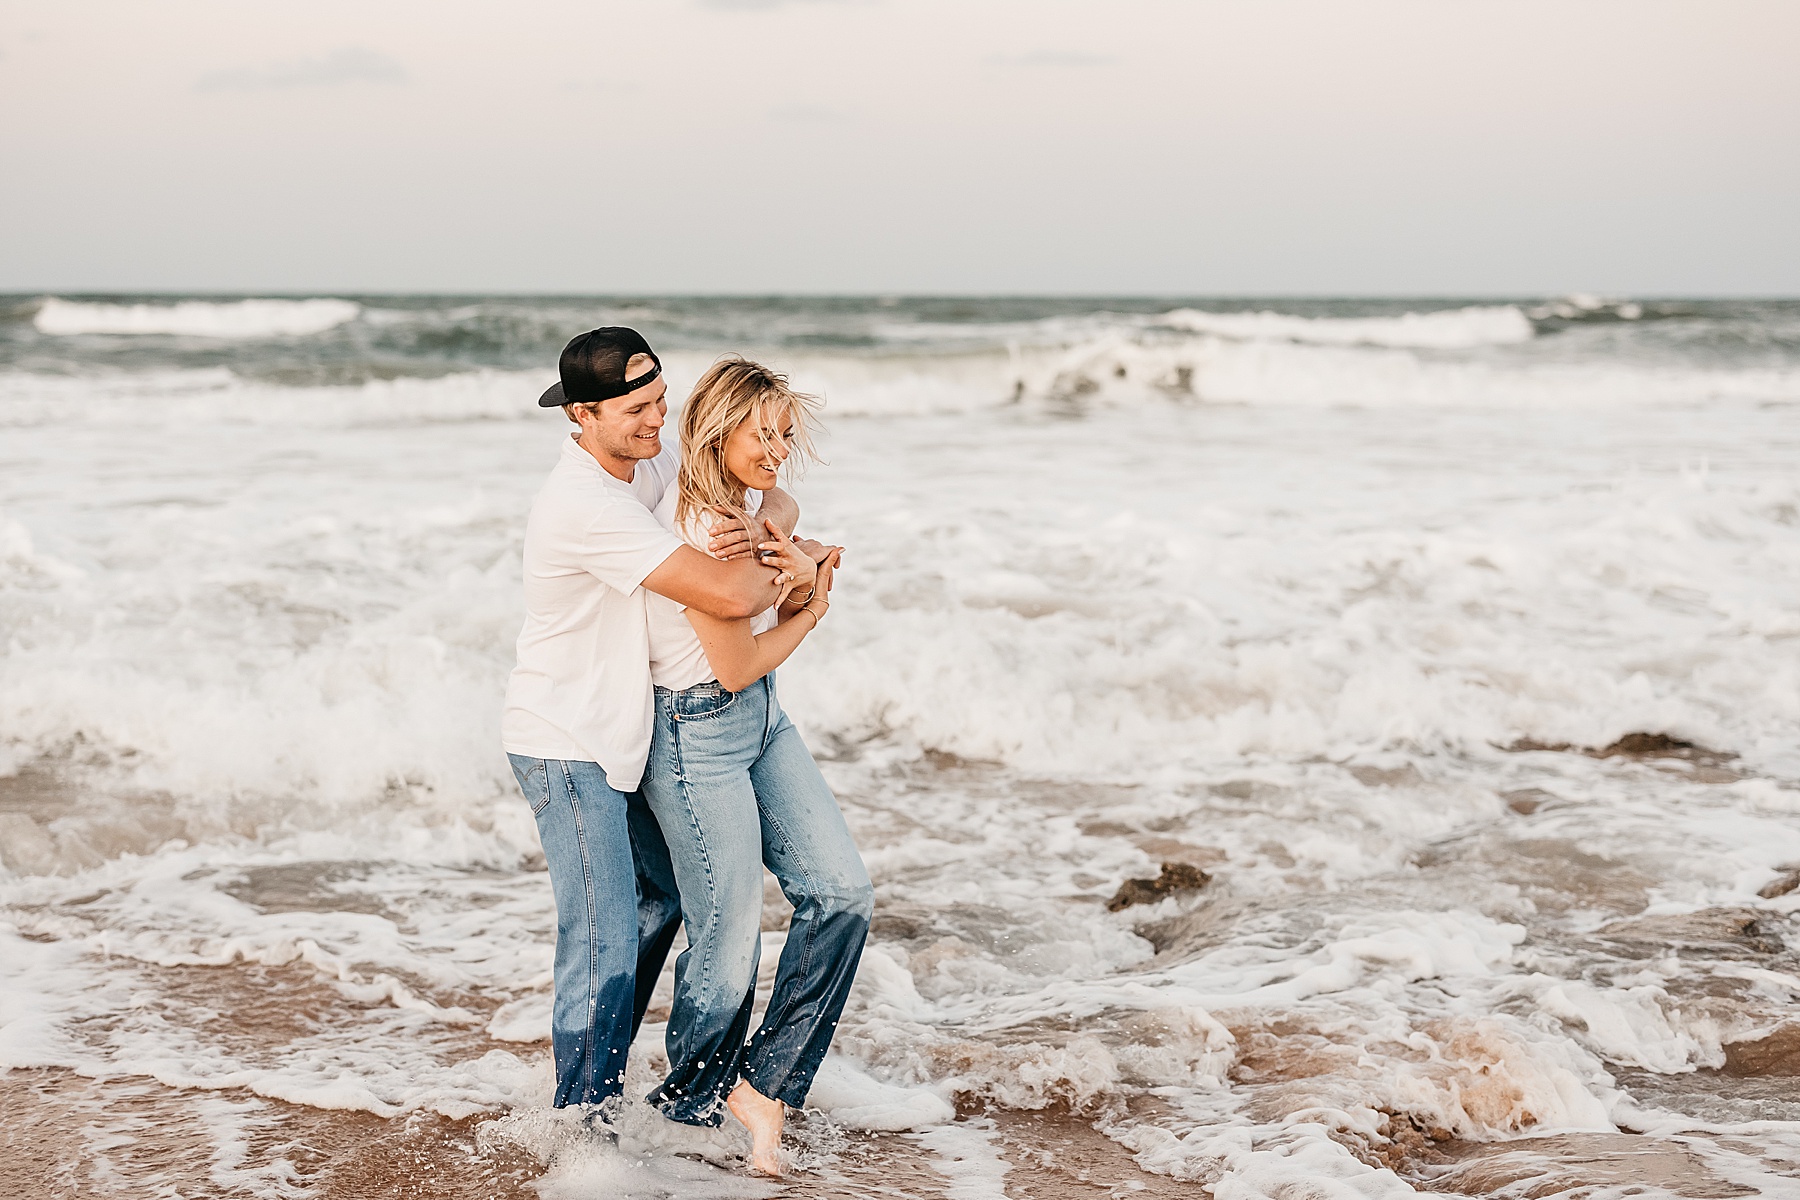 man and woman holding each other in the water on the beach wearing jeans and white shirts